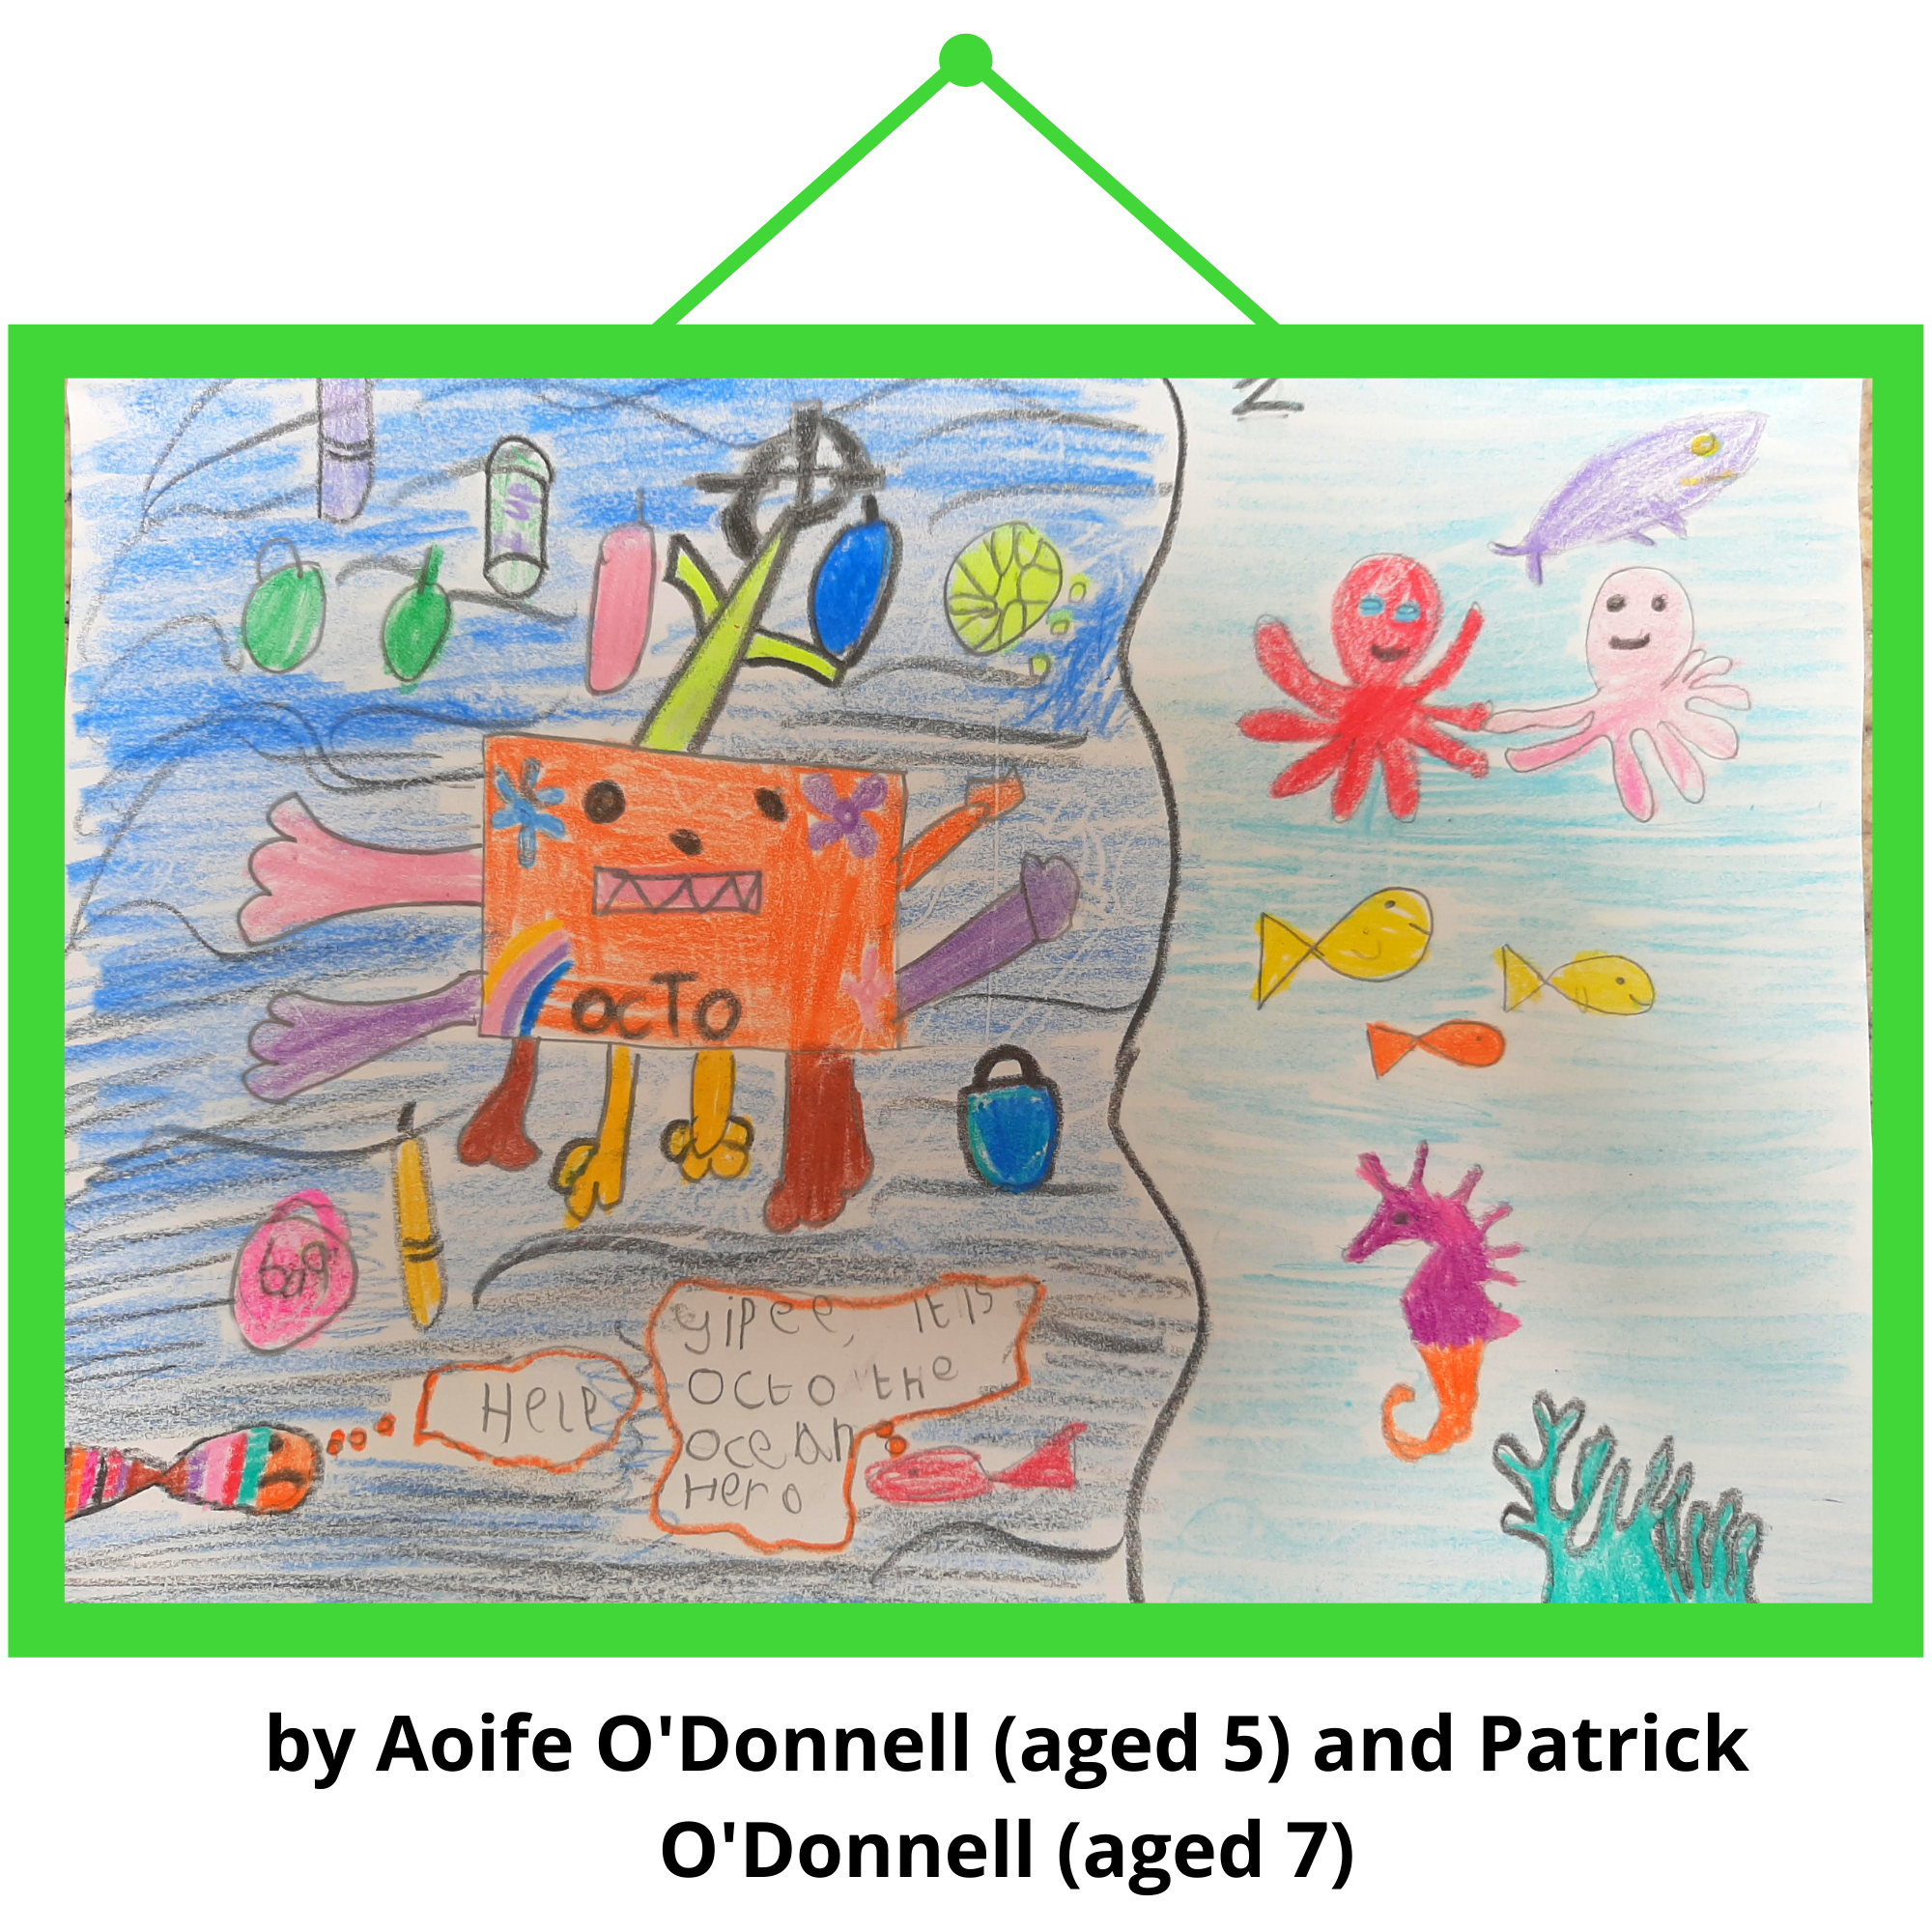 Entry by Aoife and Patrick O'Donnell